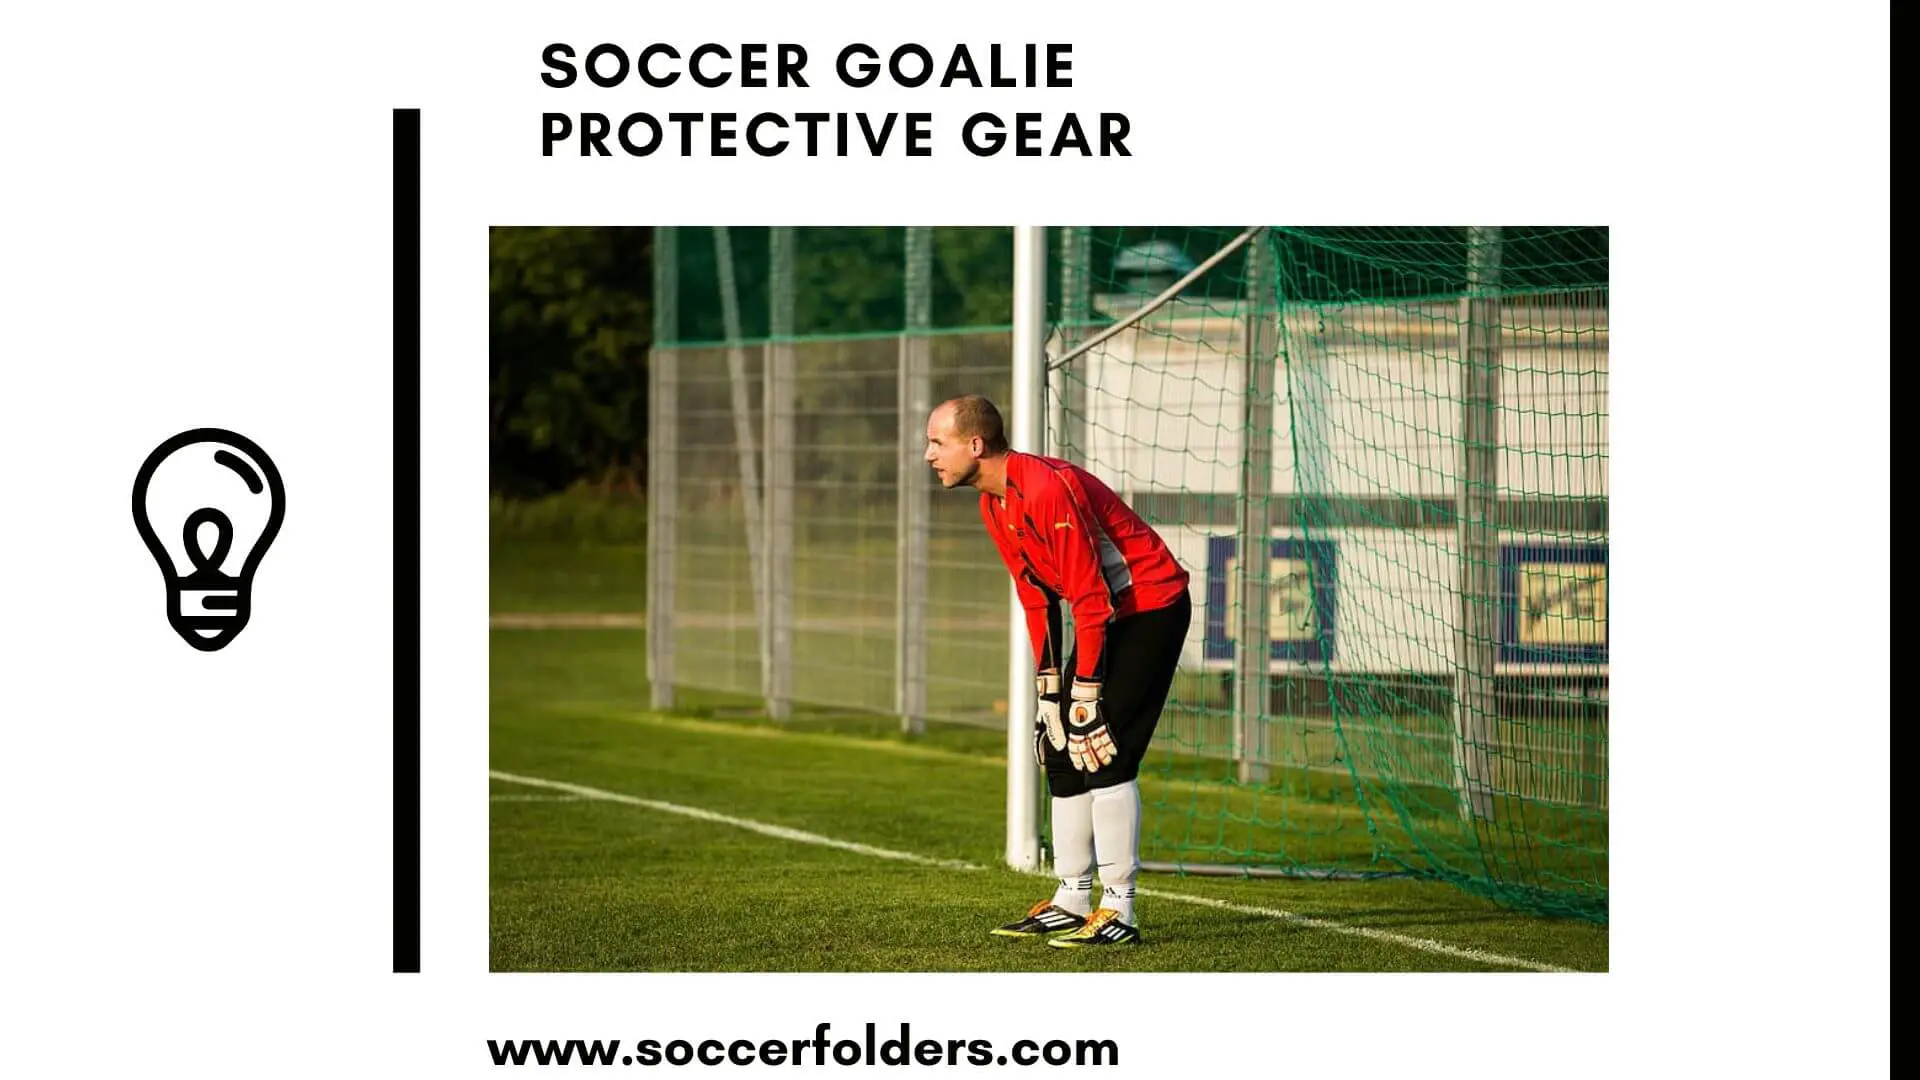 Soccer goalie protective gear - Featured Image